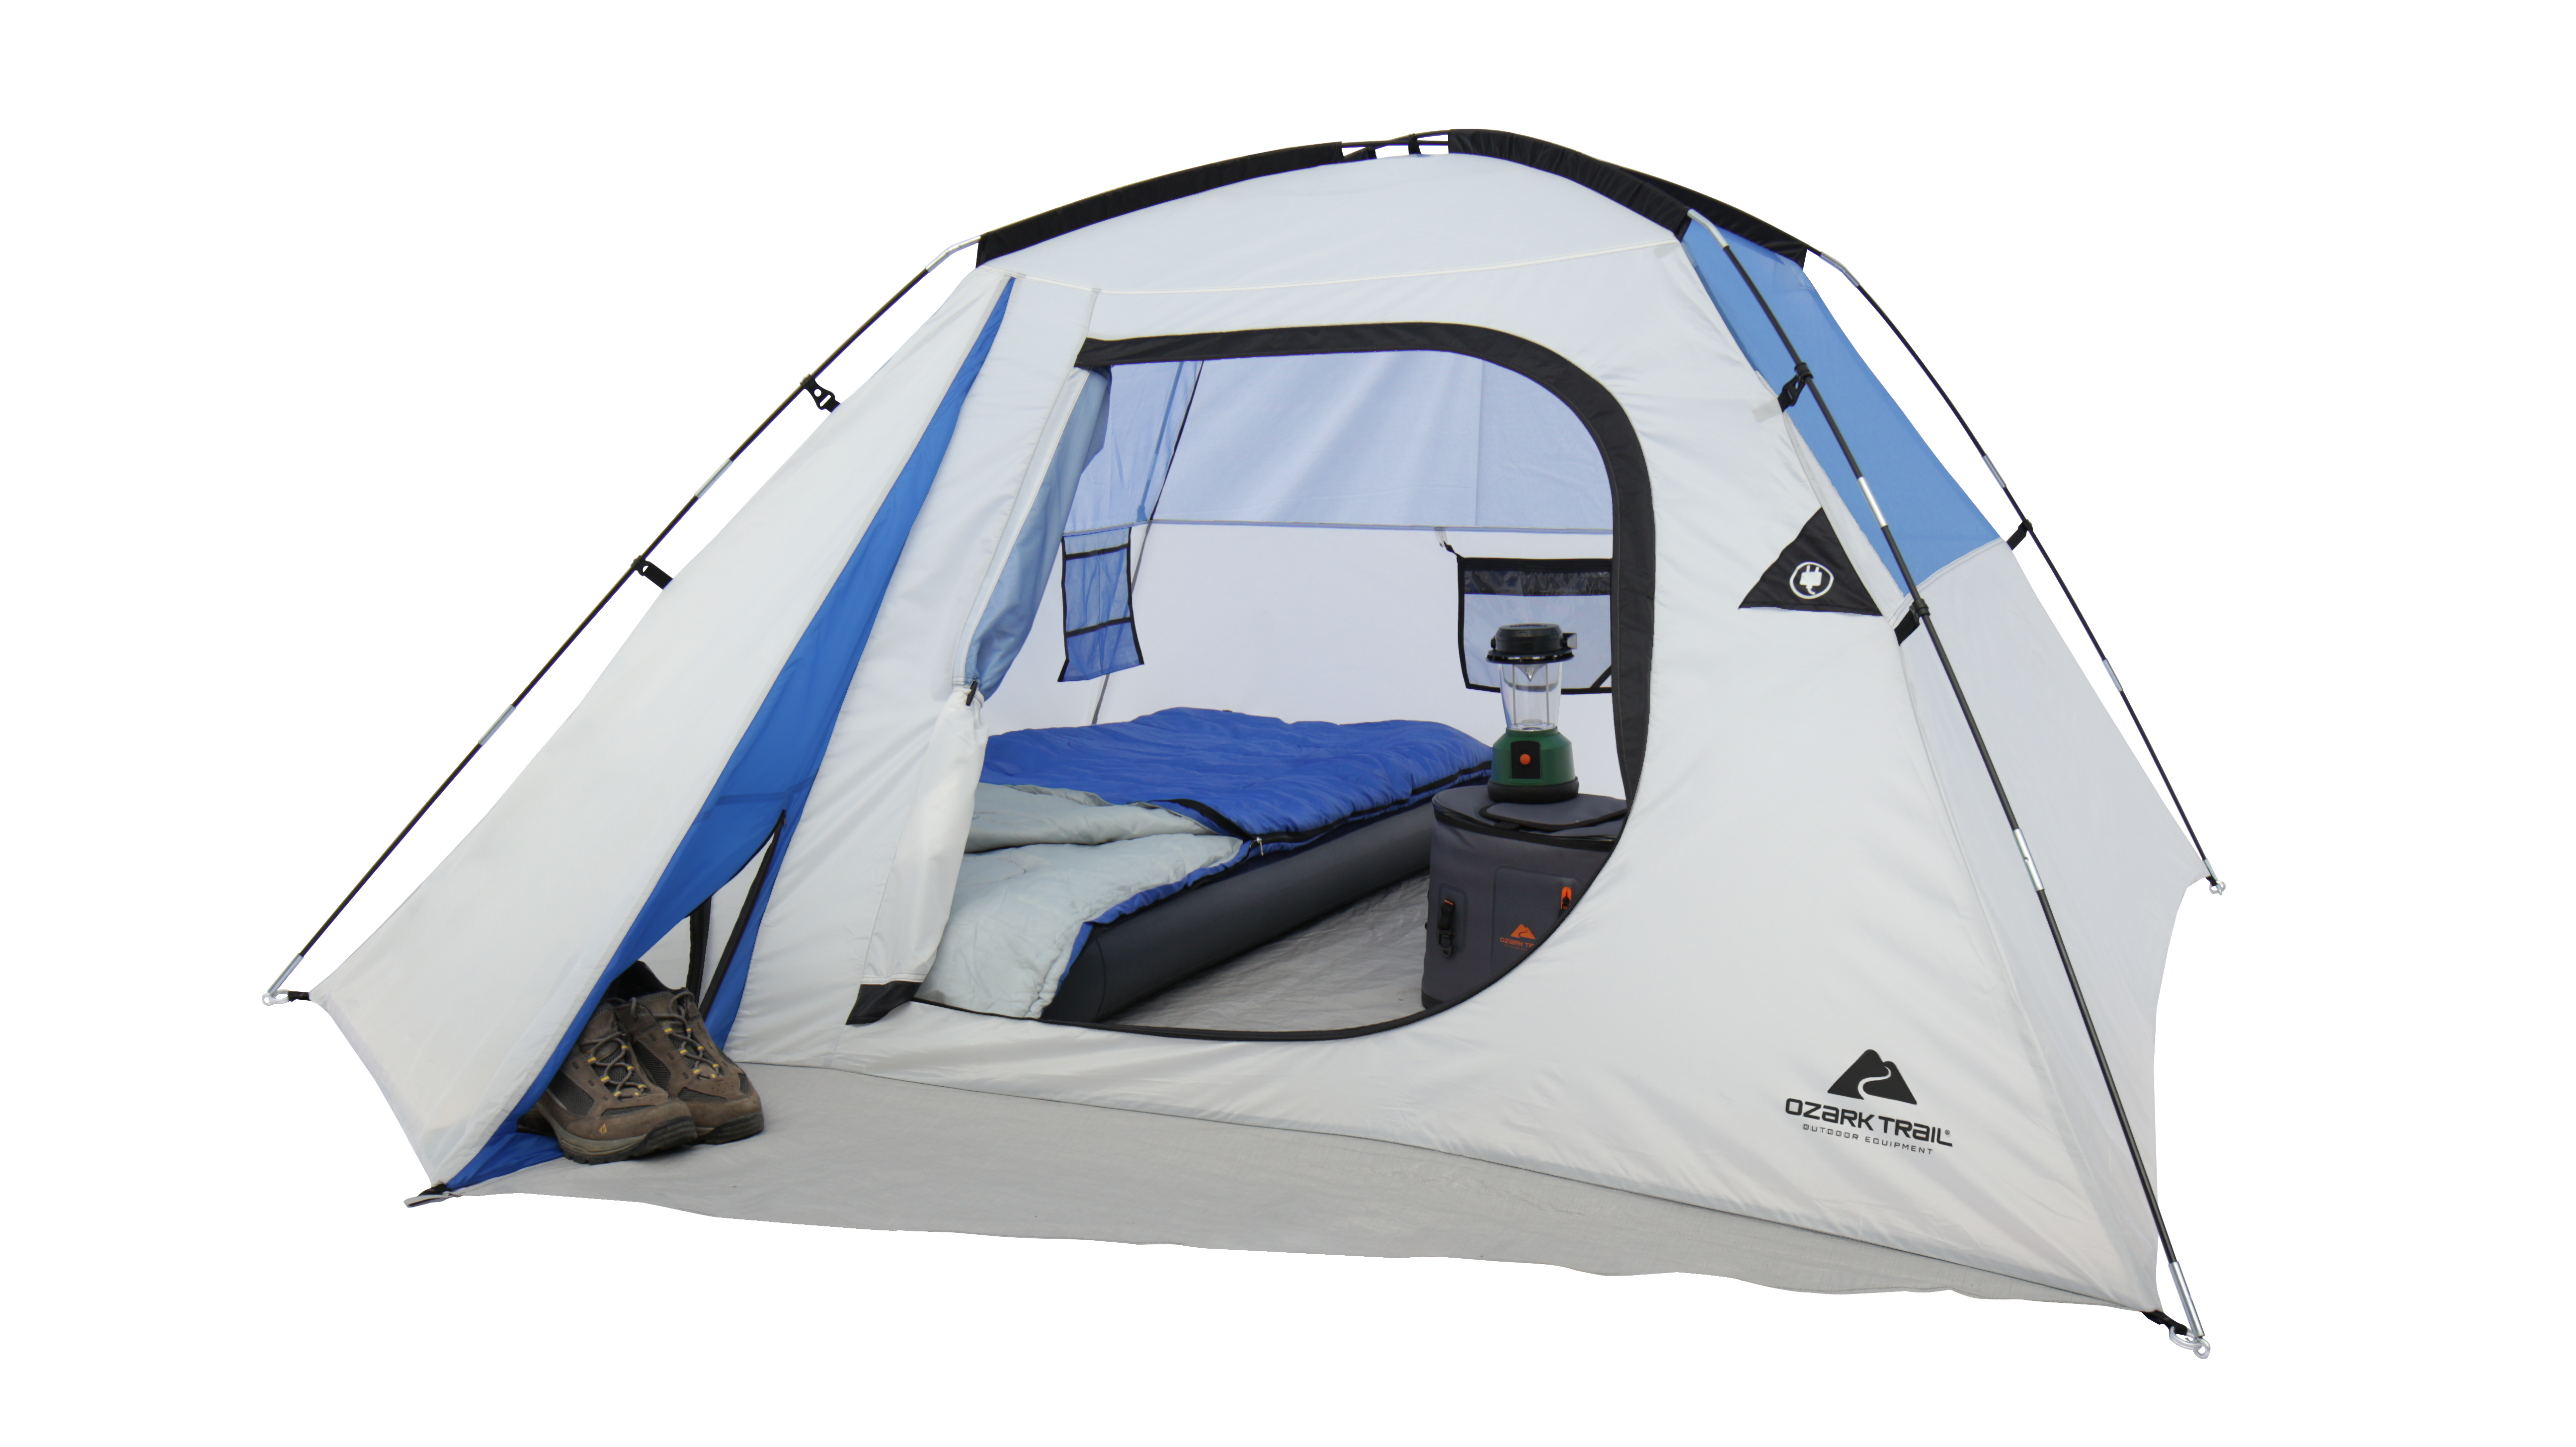 Ozark Trail 4 Person Outdoor Camping Dome Tent - image 3 of 14